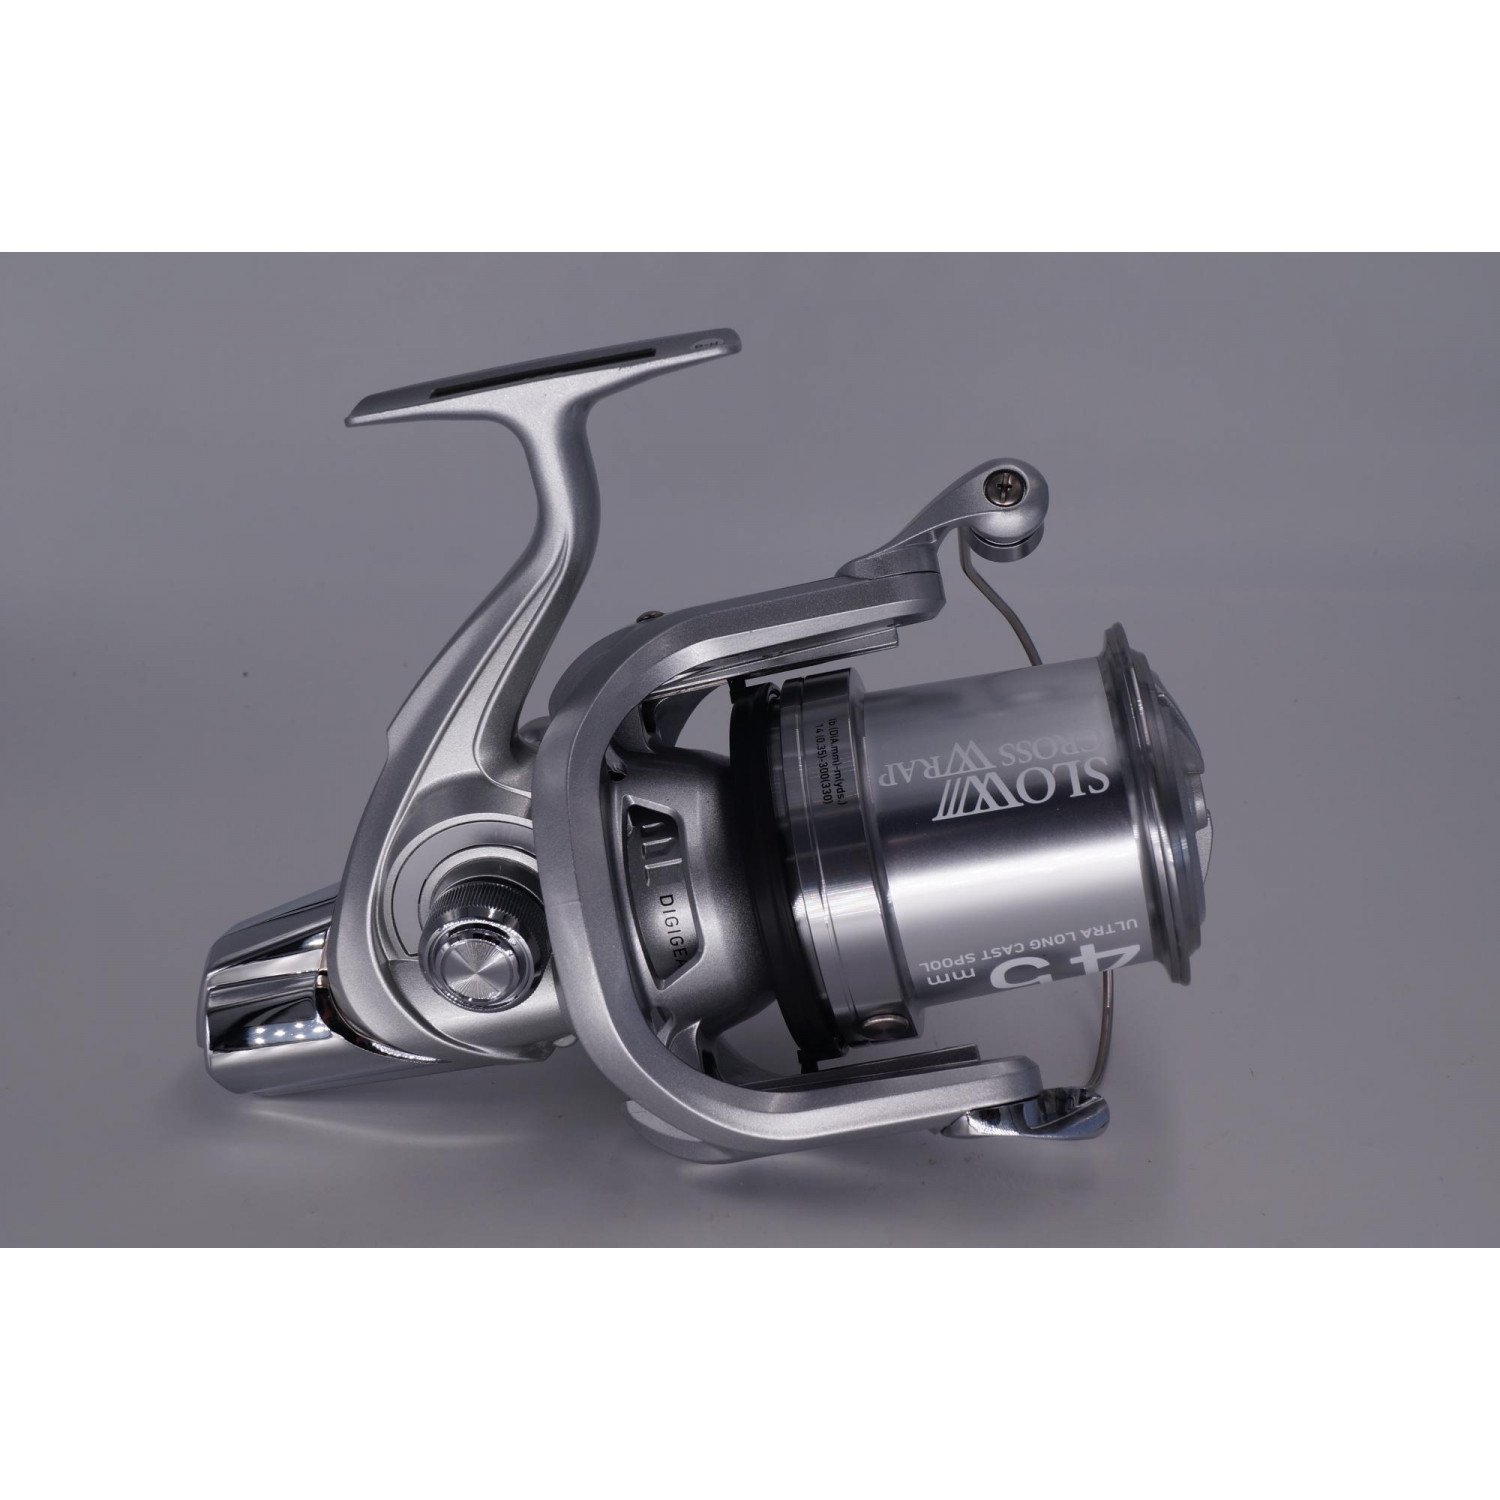 DAIWA Crosscast Surf 45 SCW QD, 5000 C, left and right hand, Big Pit Surf  fishing reel, Front Drag, Signs of use